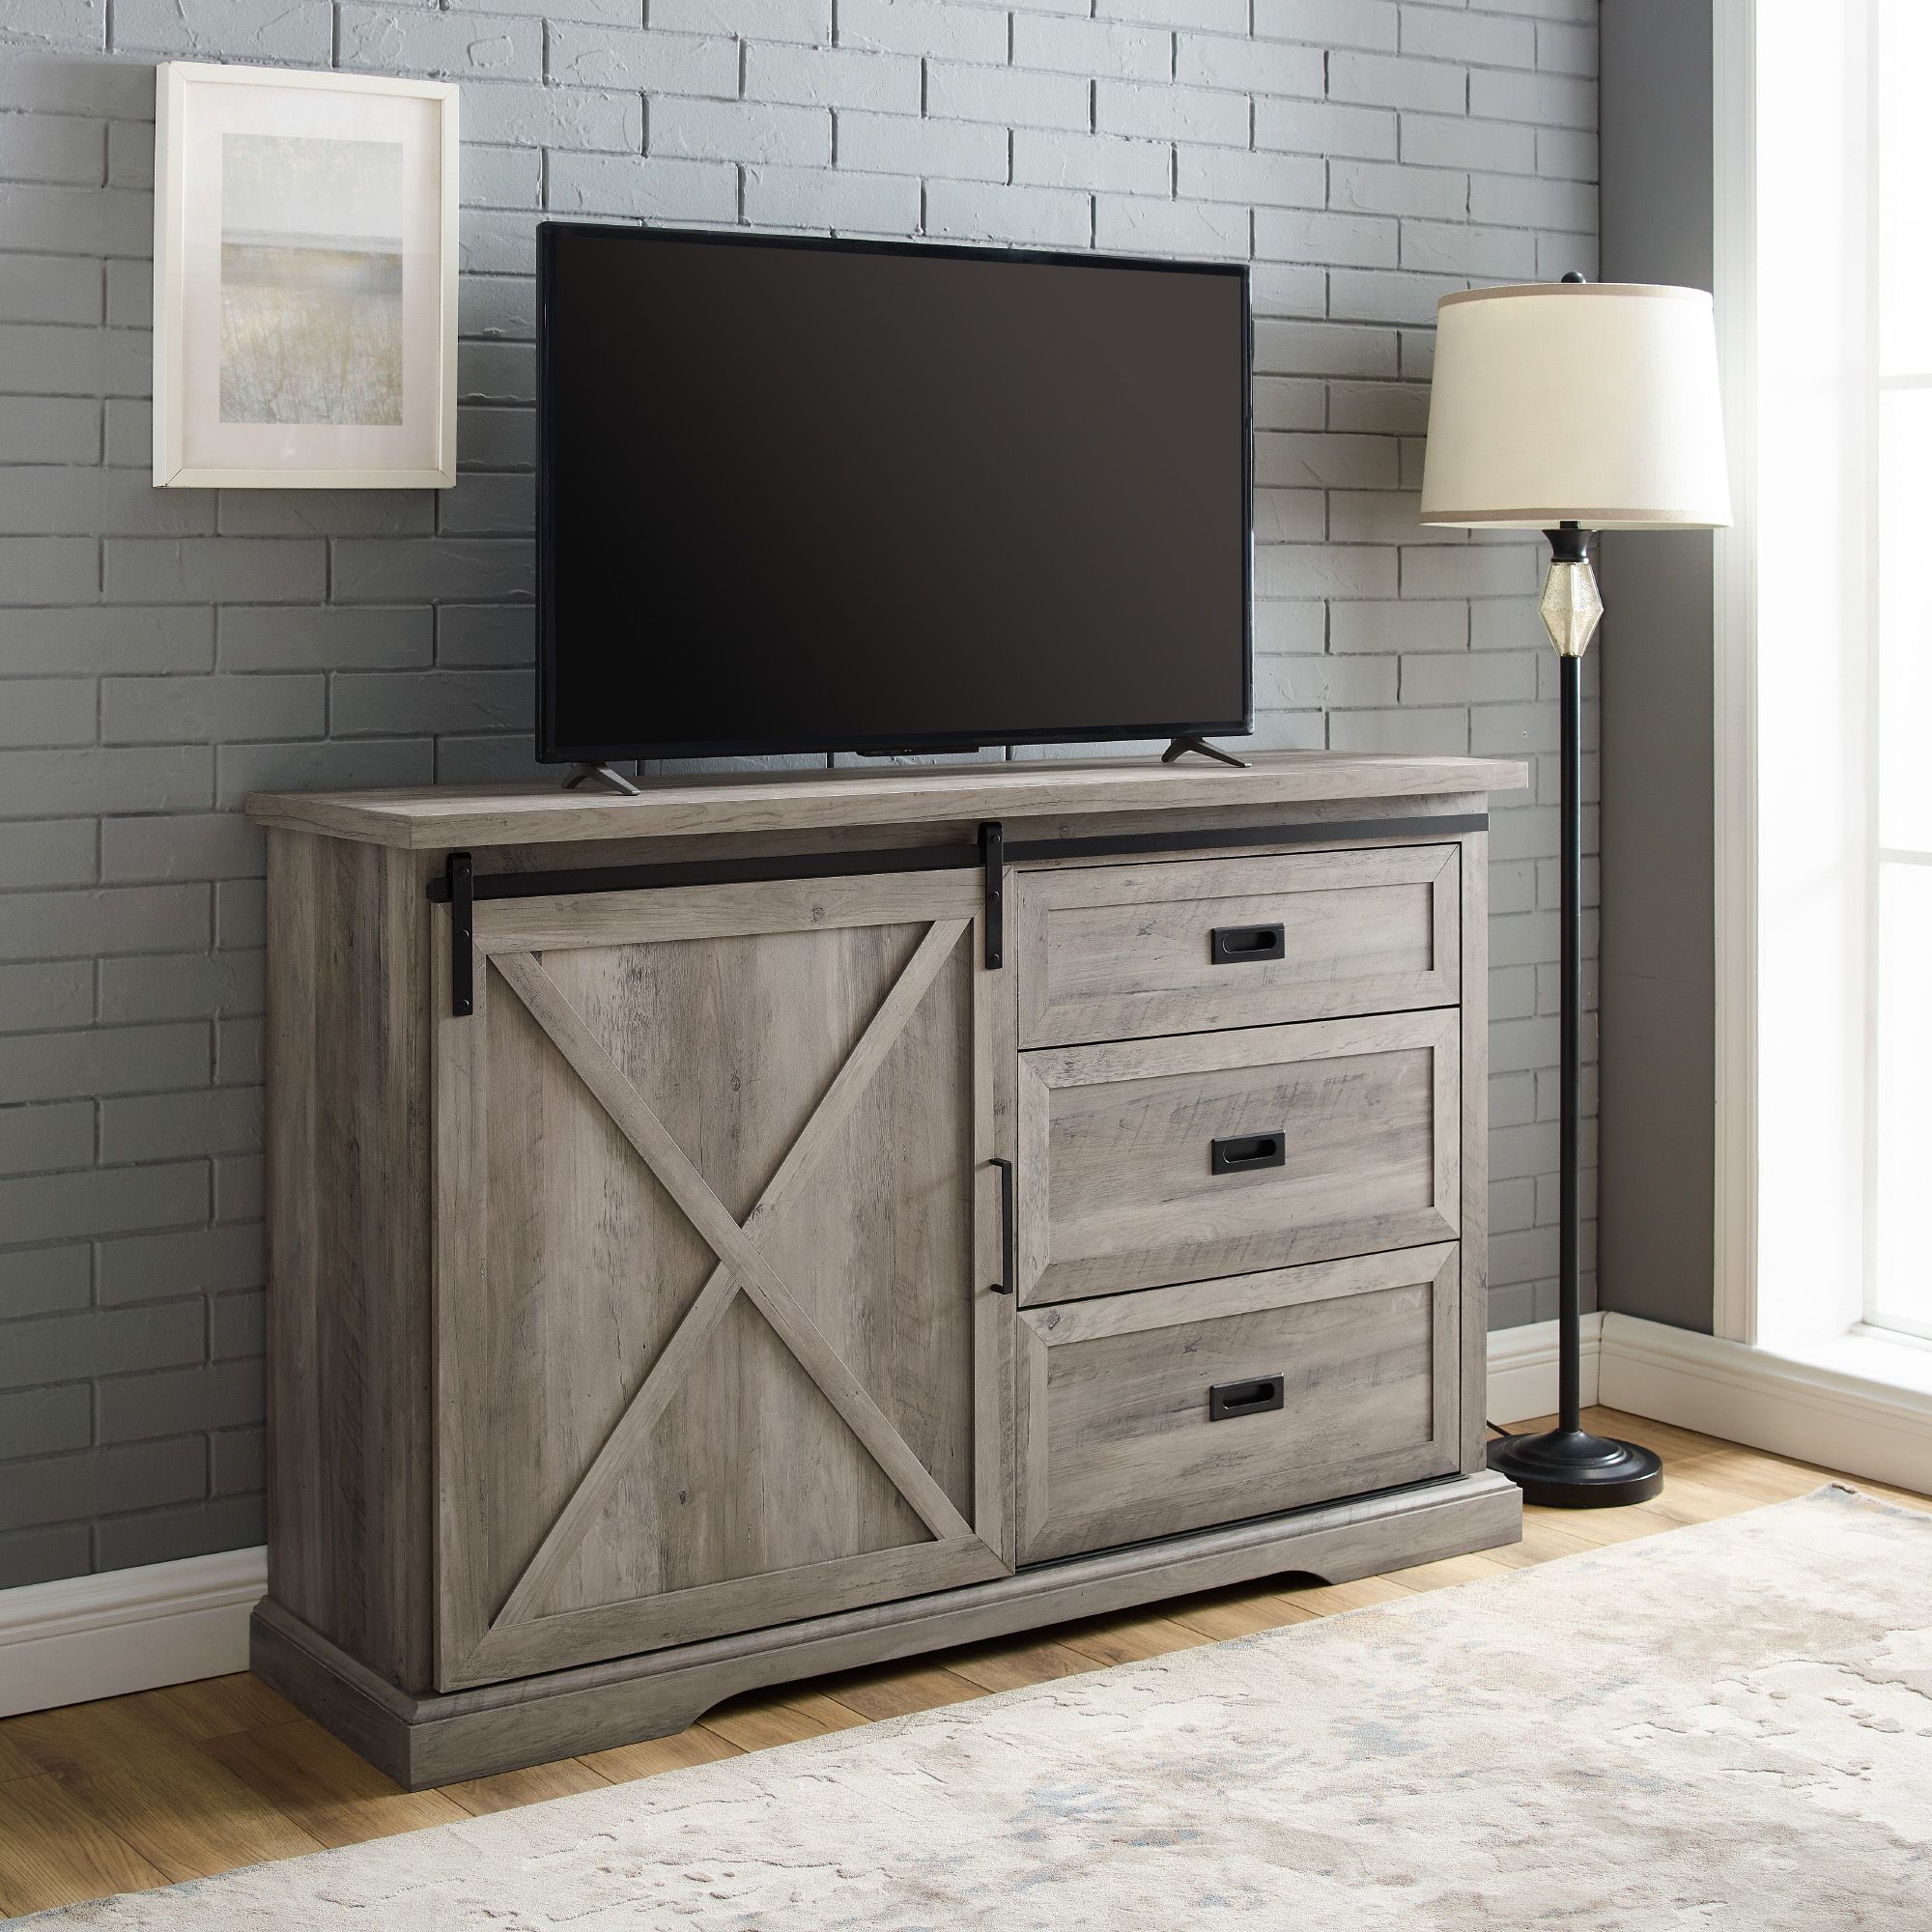 Manor Park Sliding Door Tv Stand For Tvs Up To 60", Grey For Camden Corner Tv Stands For Tvs Up To 60" (View 10 of 15)